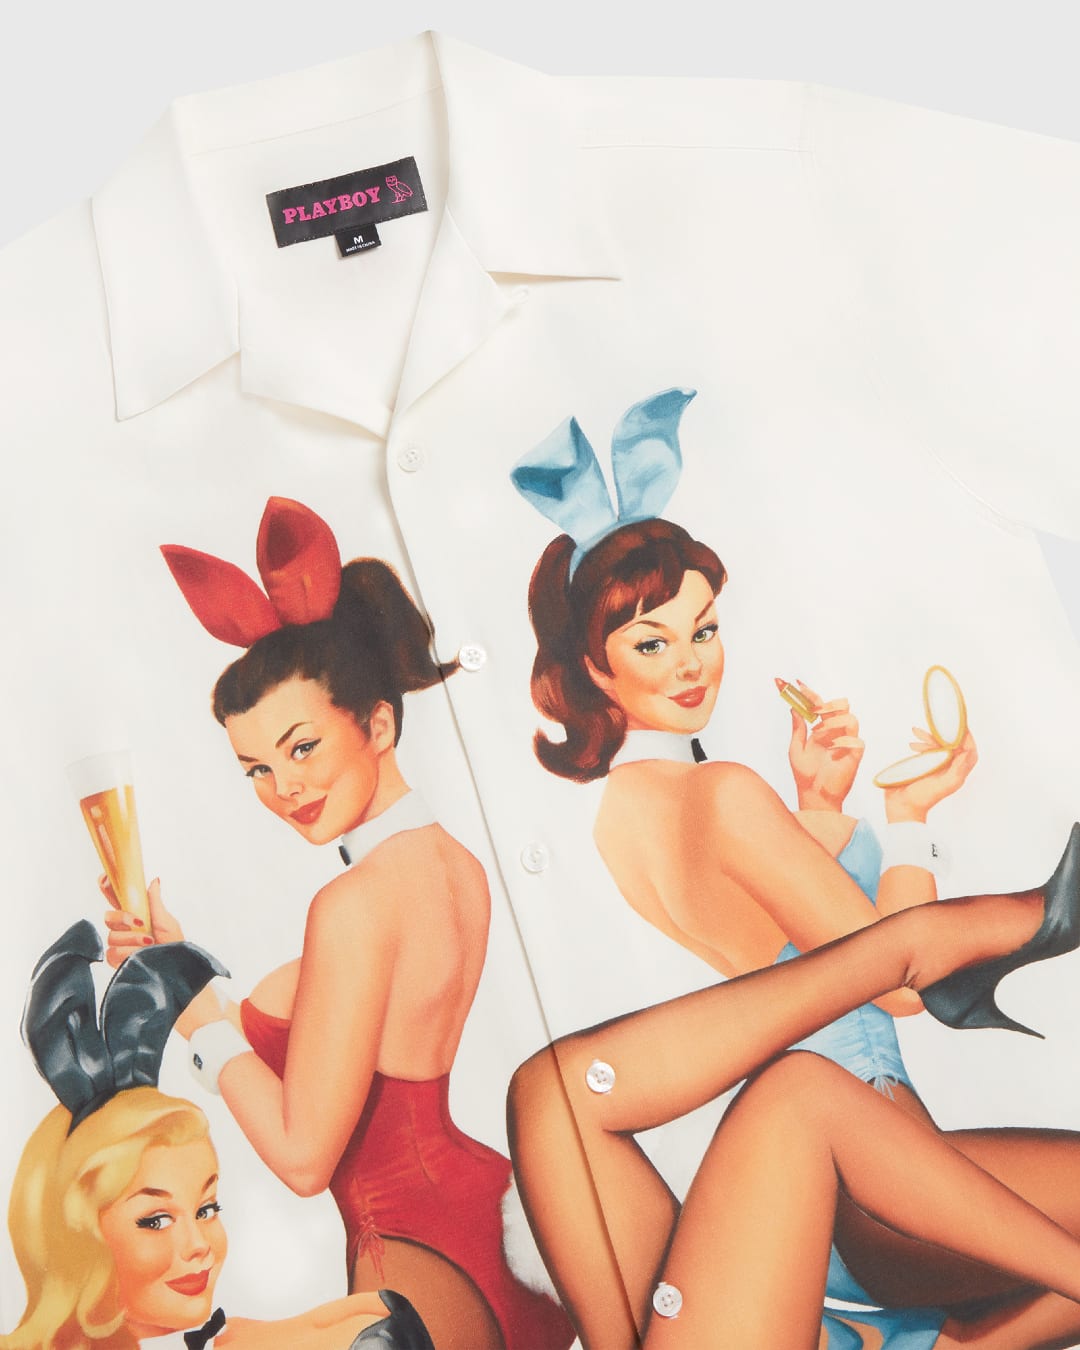 A button-up featuring vintage pinup Playboy bunnies